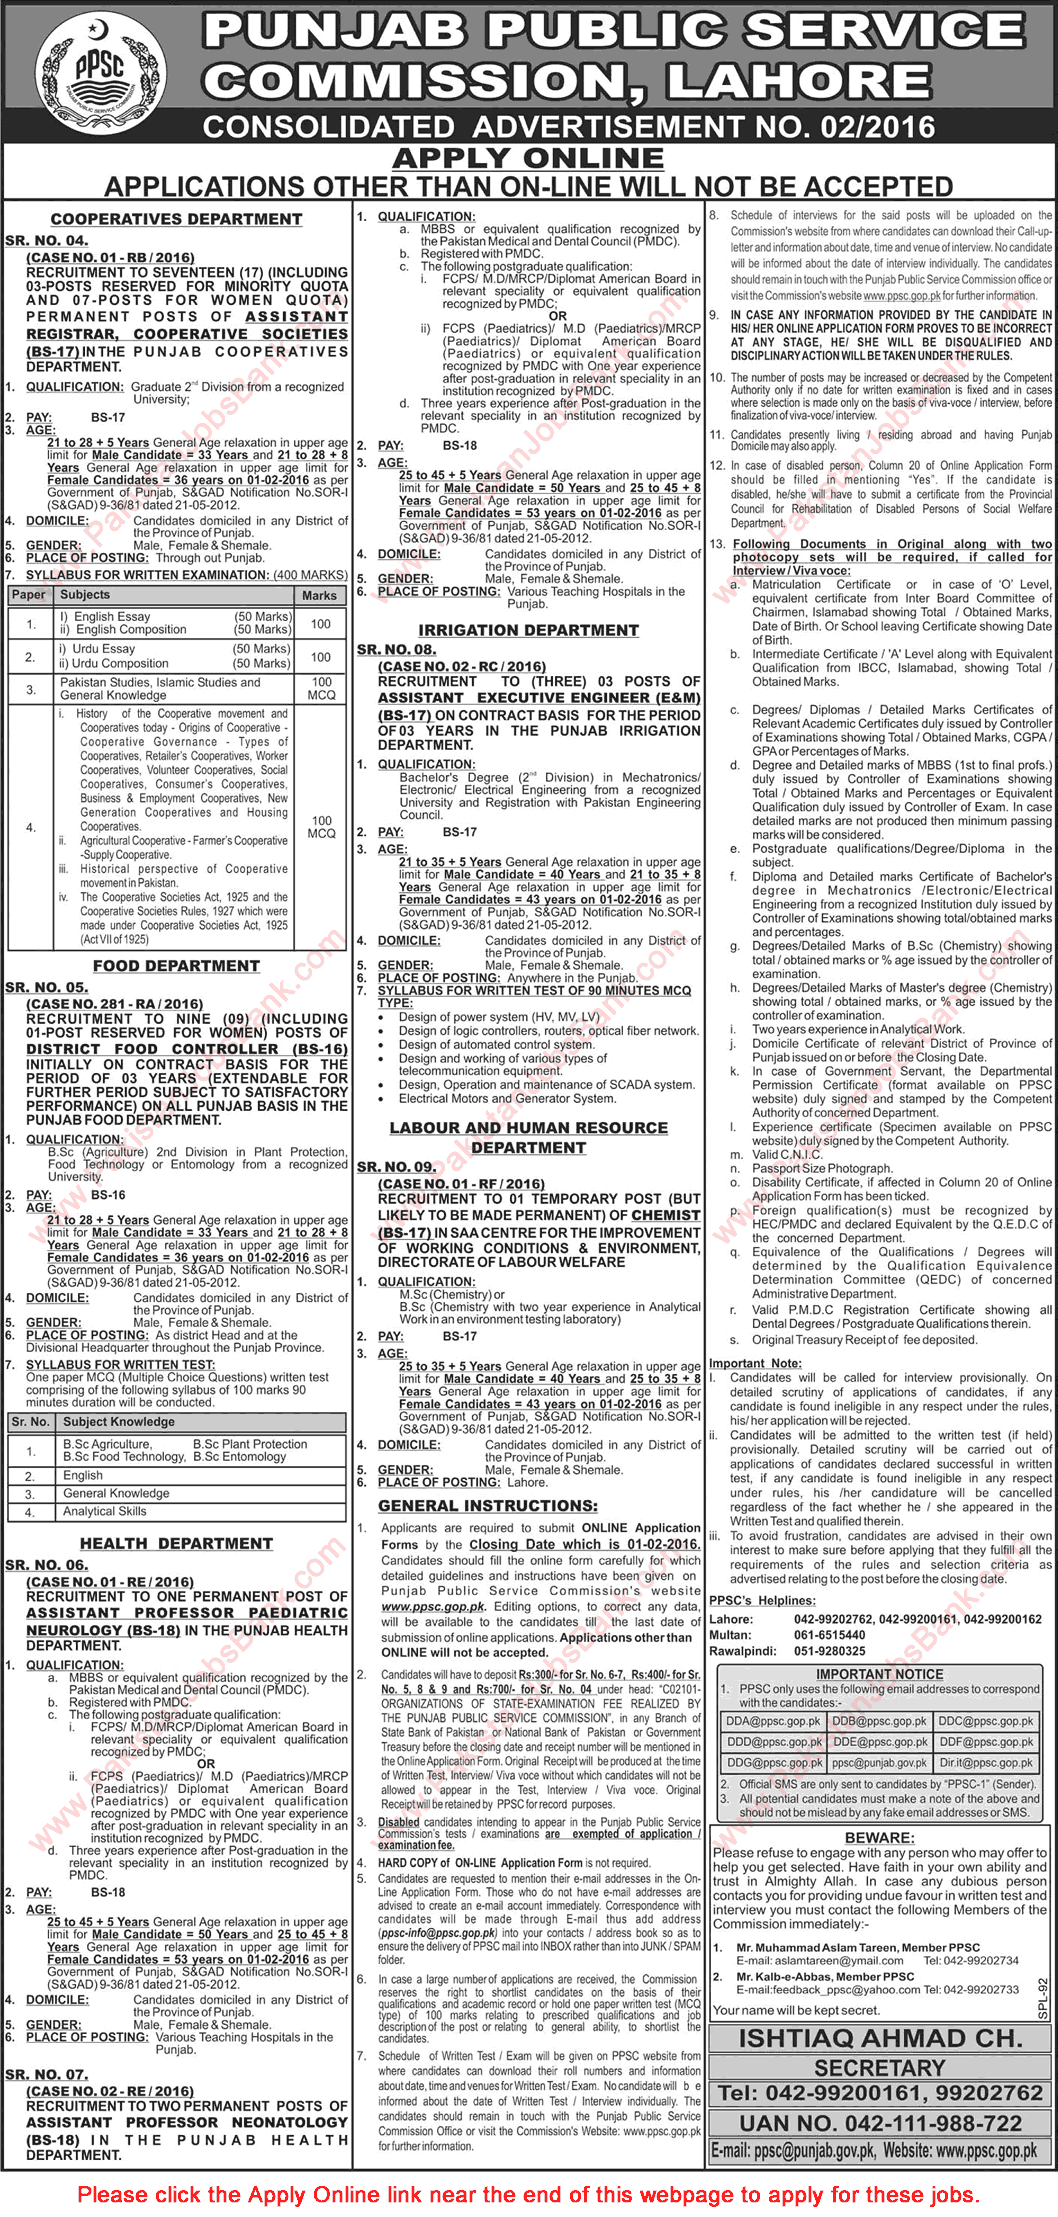 PPSC Jobs January 2016 Consolidated Advertisement No 02/2016 2/2016 Apply Online Latest